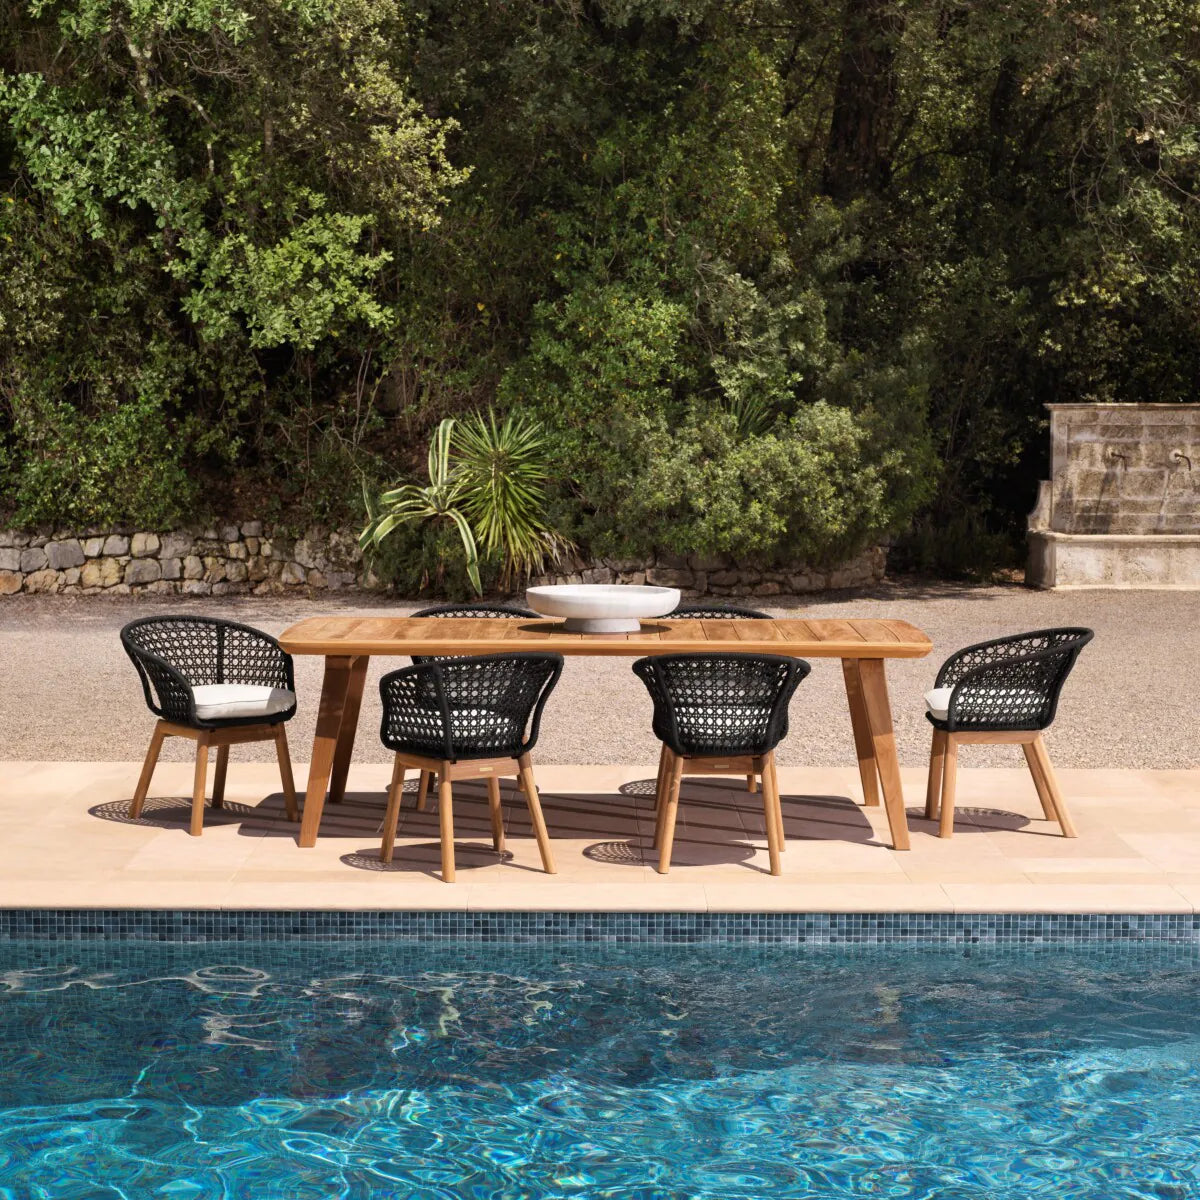 OUTDOOR DINING CHAIR TRINITY